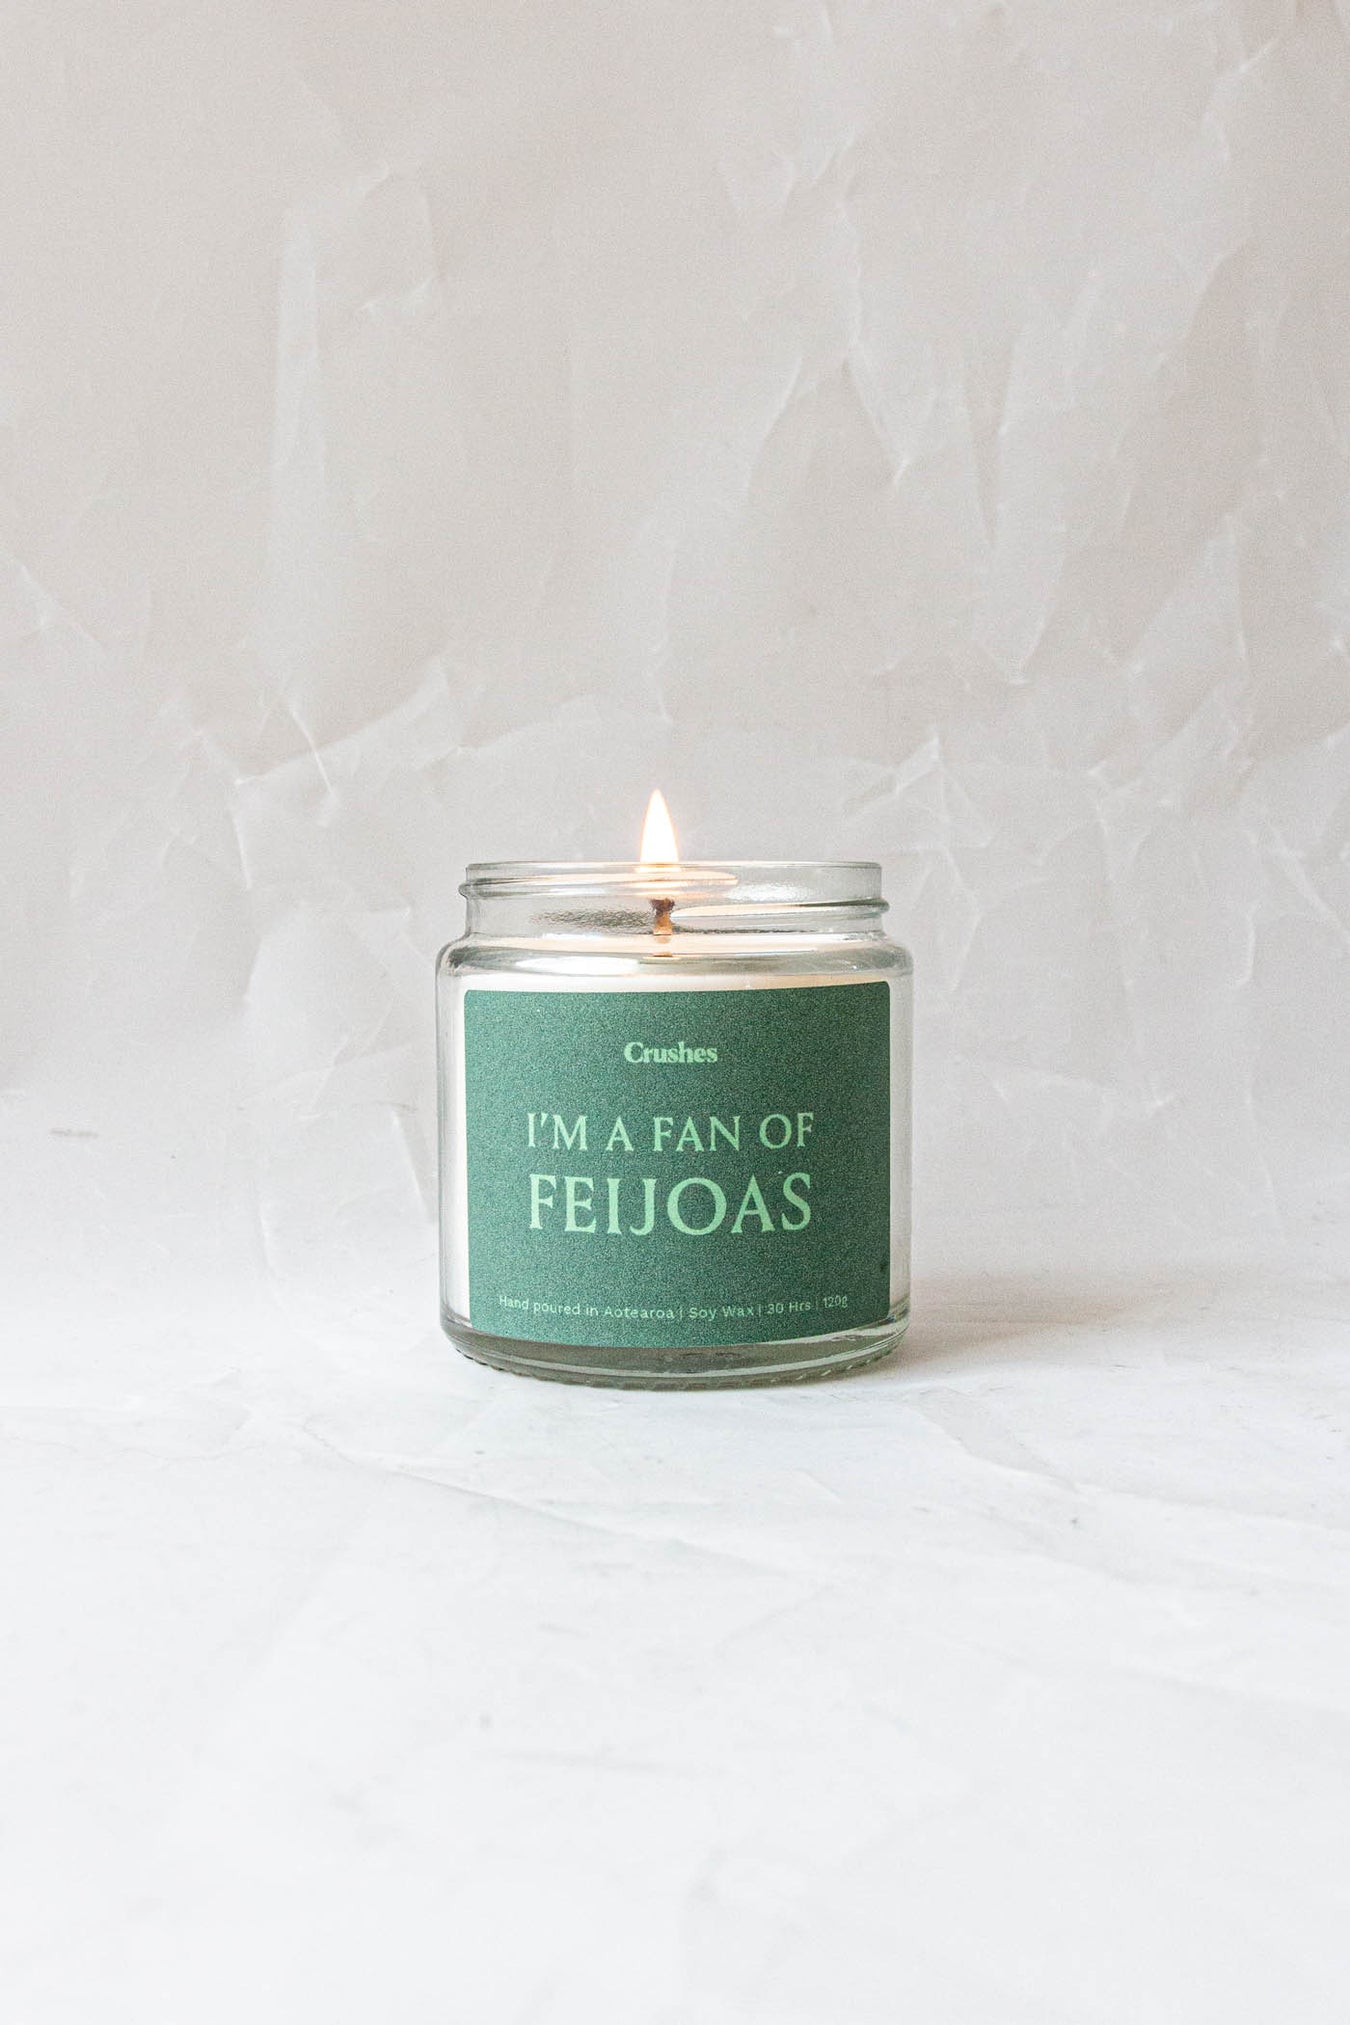 Limited Edition Candles by Crushes